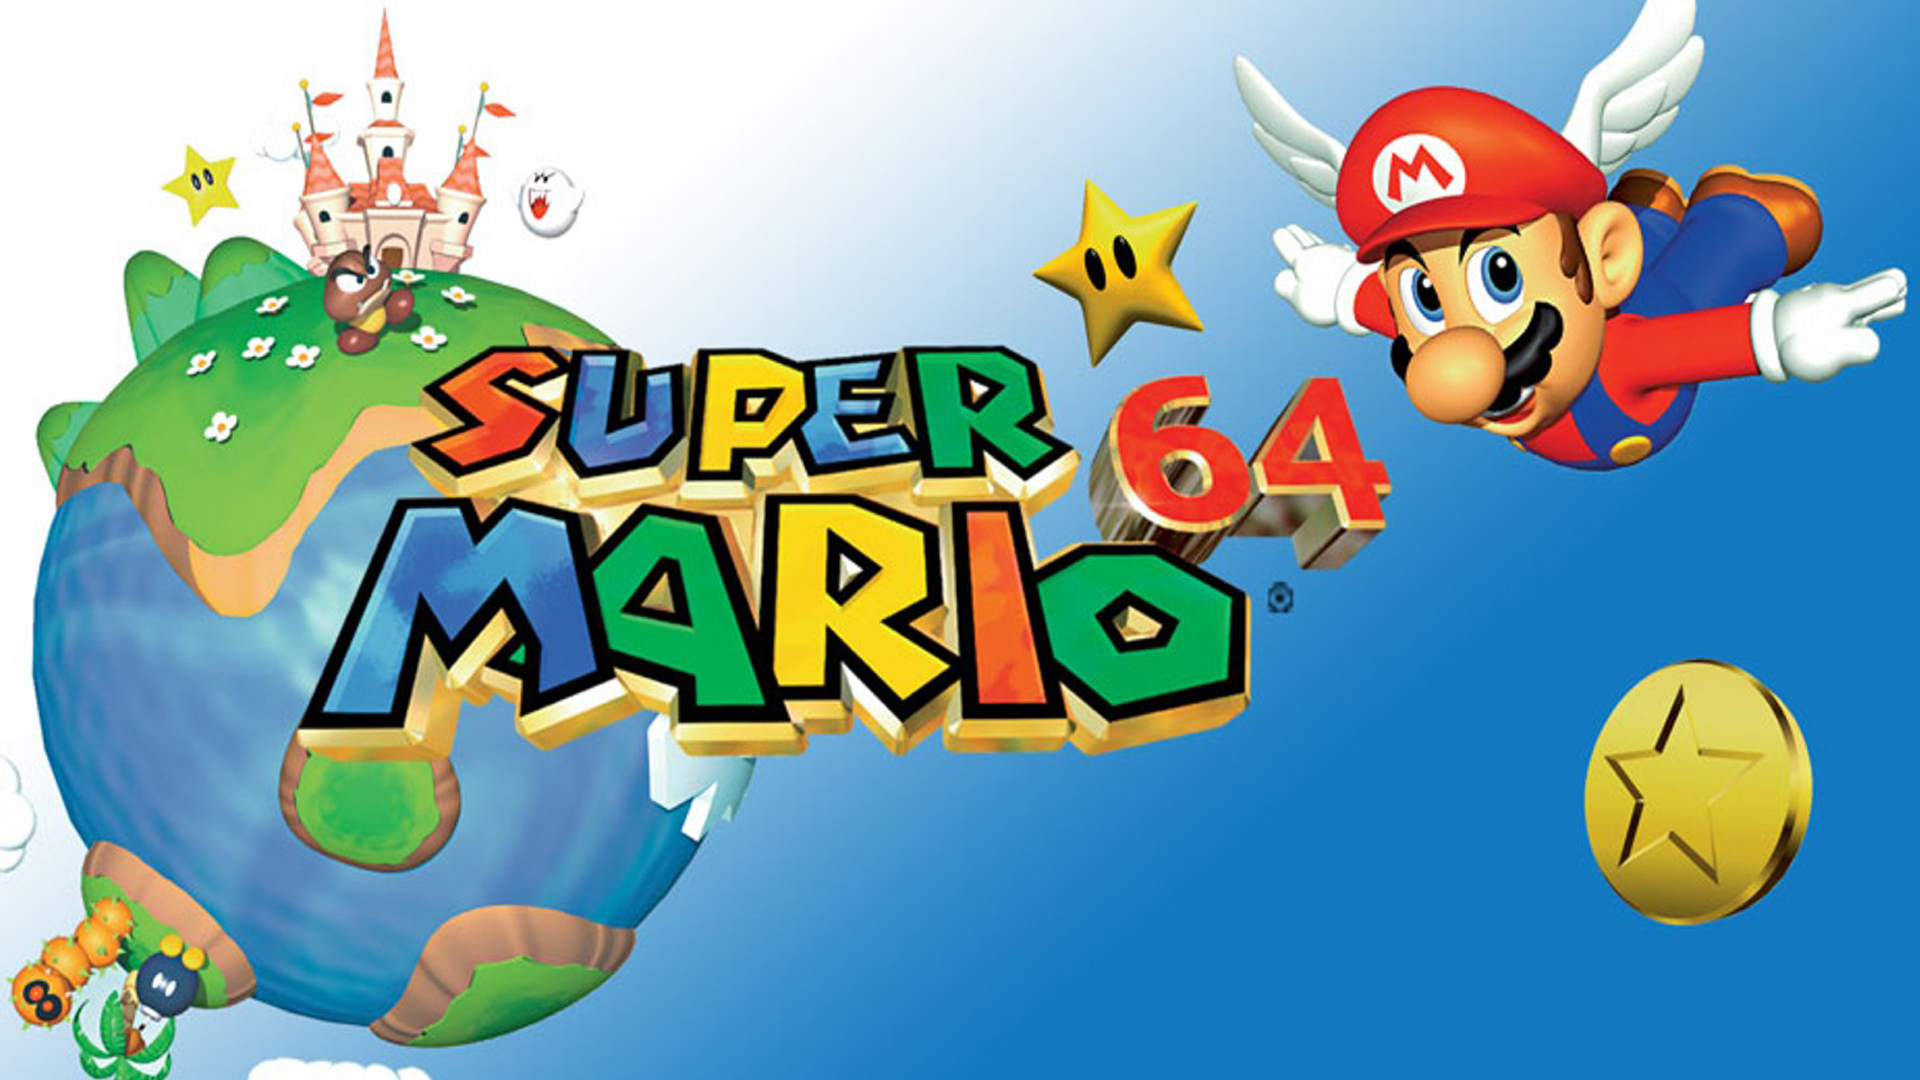 Super Mario 64 turns 25: Examining the impact of the N64’s most revolutionary game